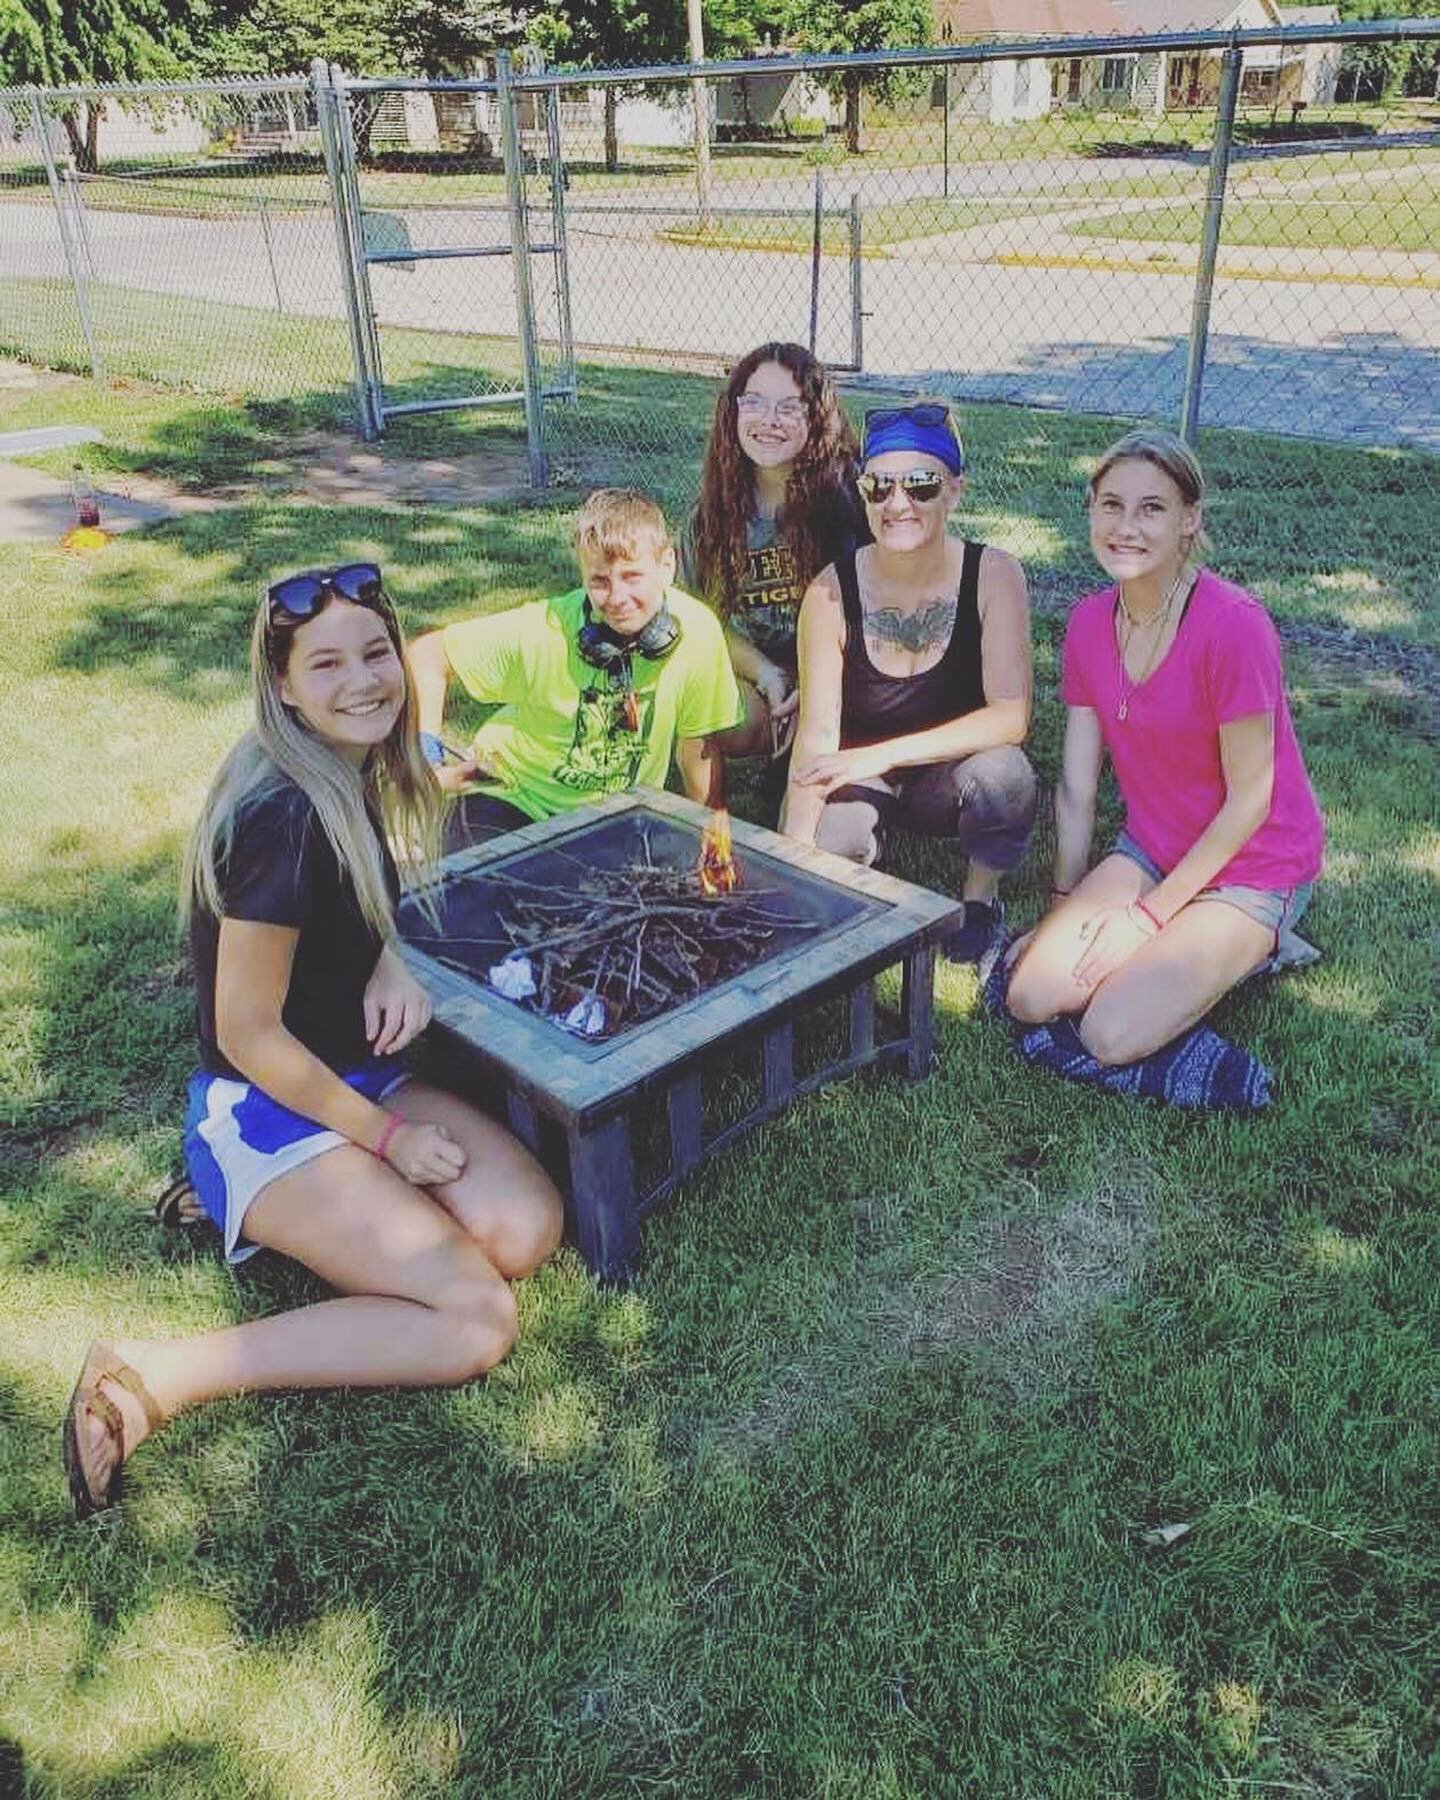 Always a great day to have a water fight after starting a fire. Today we learned about the Holy Spirit and how he empowers us to share the gospel! #HappyCamper